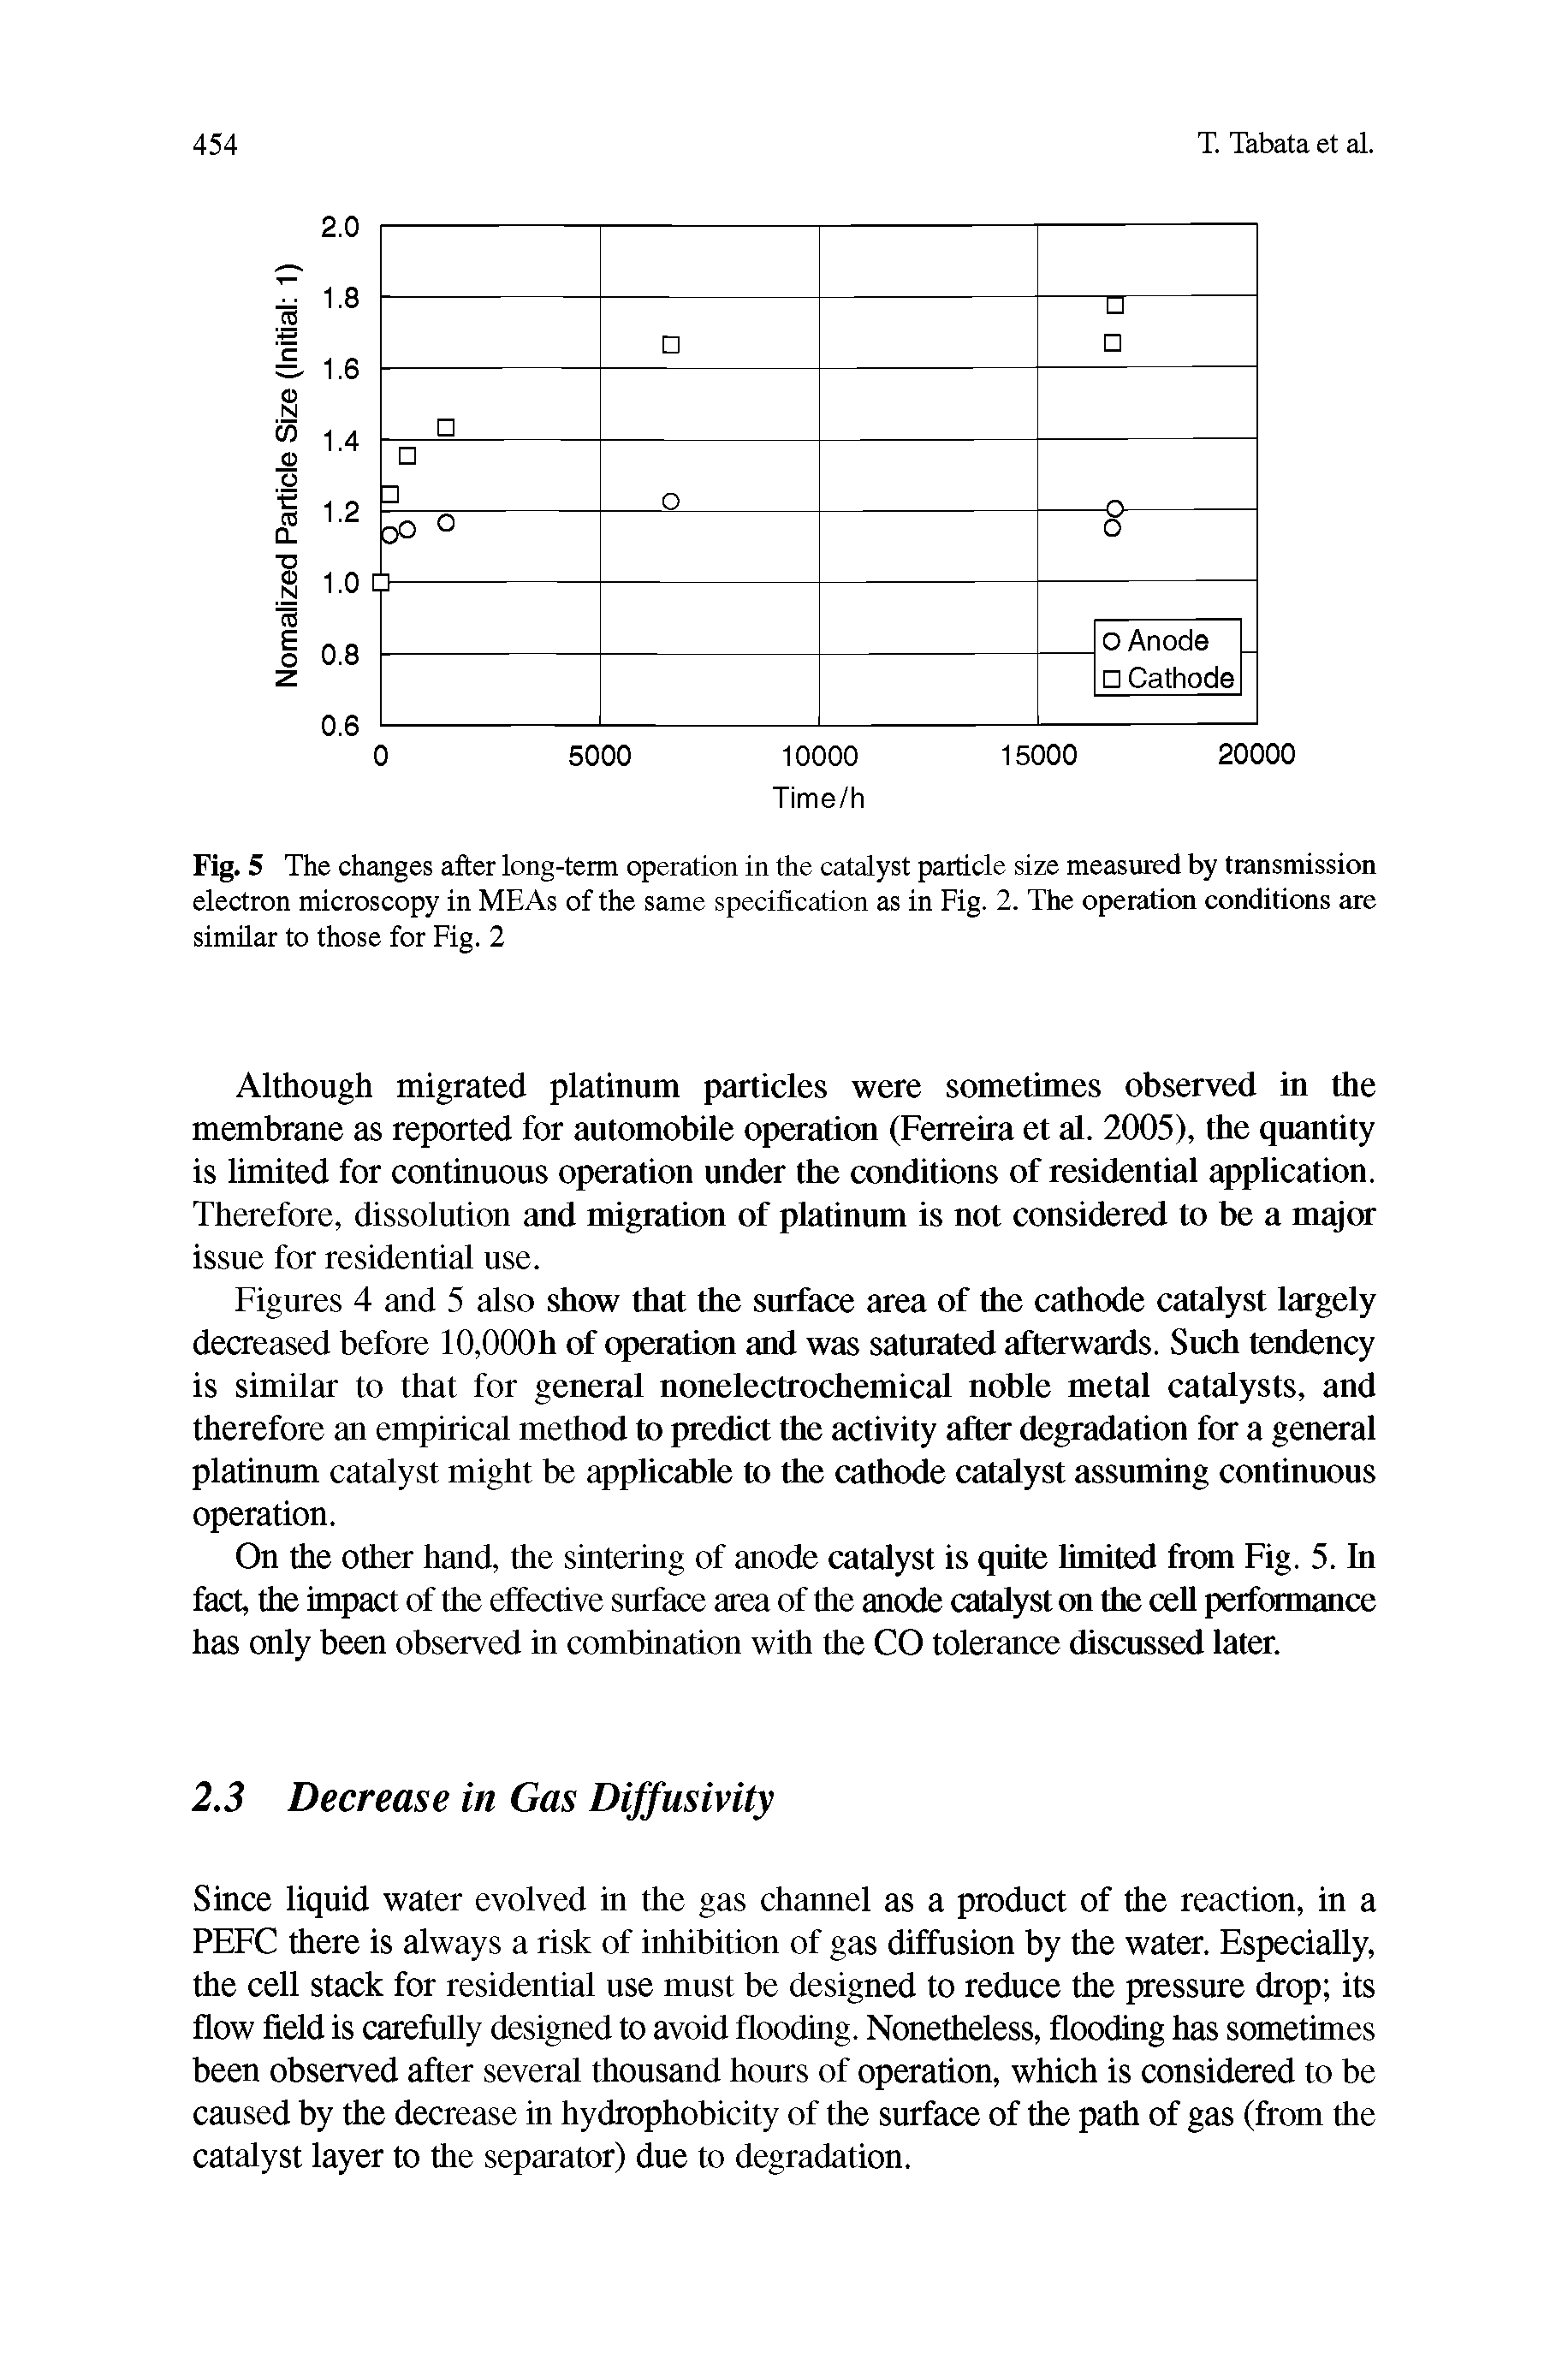 Figures 4 and 5 also show that the surface area of the cathode catalyst largely decreased before 10,000h of operation and was saturated afterwards. Such tendency is similar to that for general nonelectrochemical noble metal catalysts, and therefore an empirical method to predict the activity after degradation for a general platinum catalyst might be applicable to the cathode catalyst assuming continuous operation.